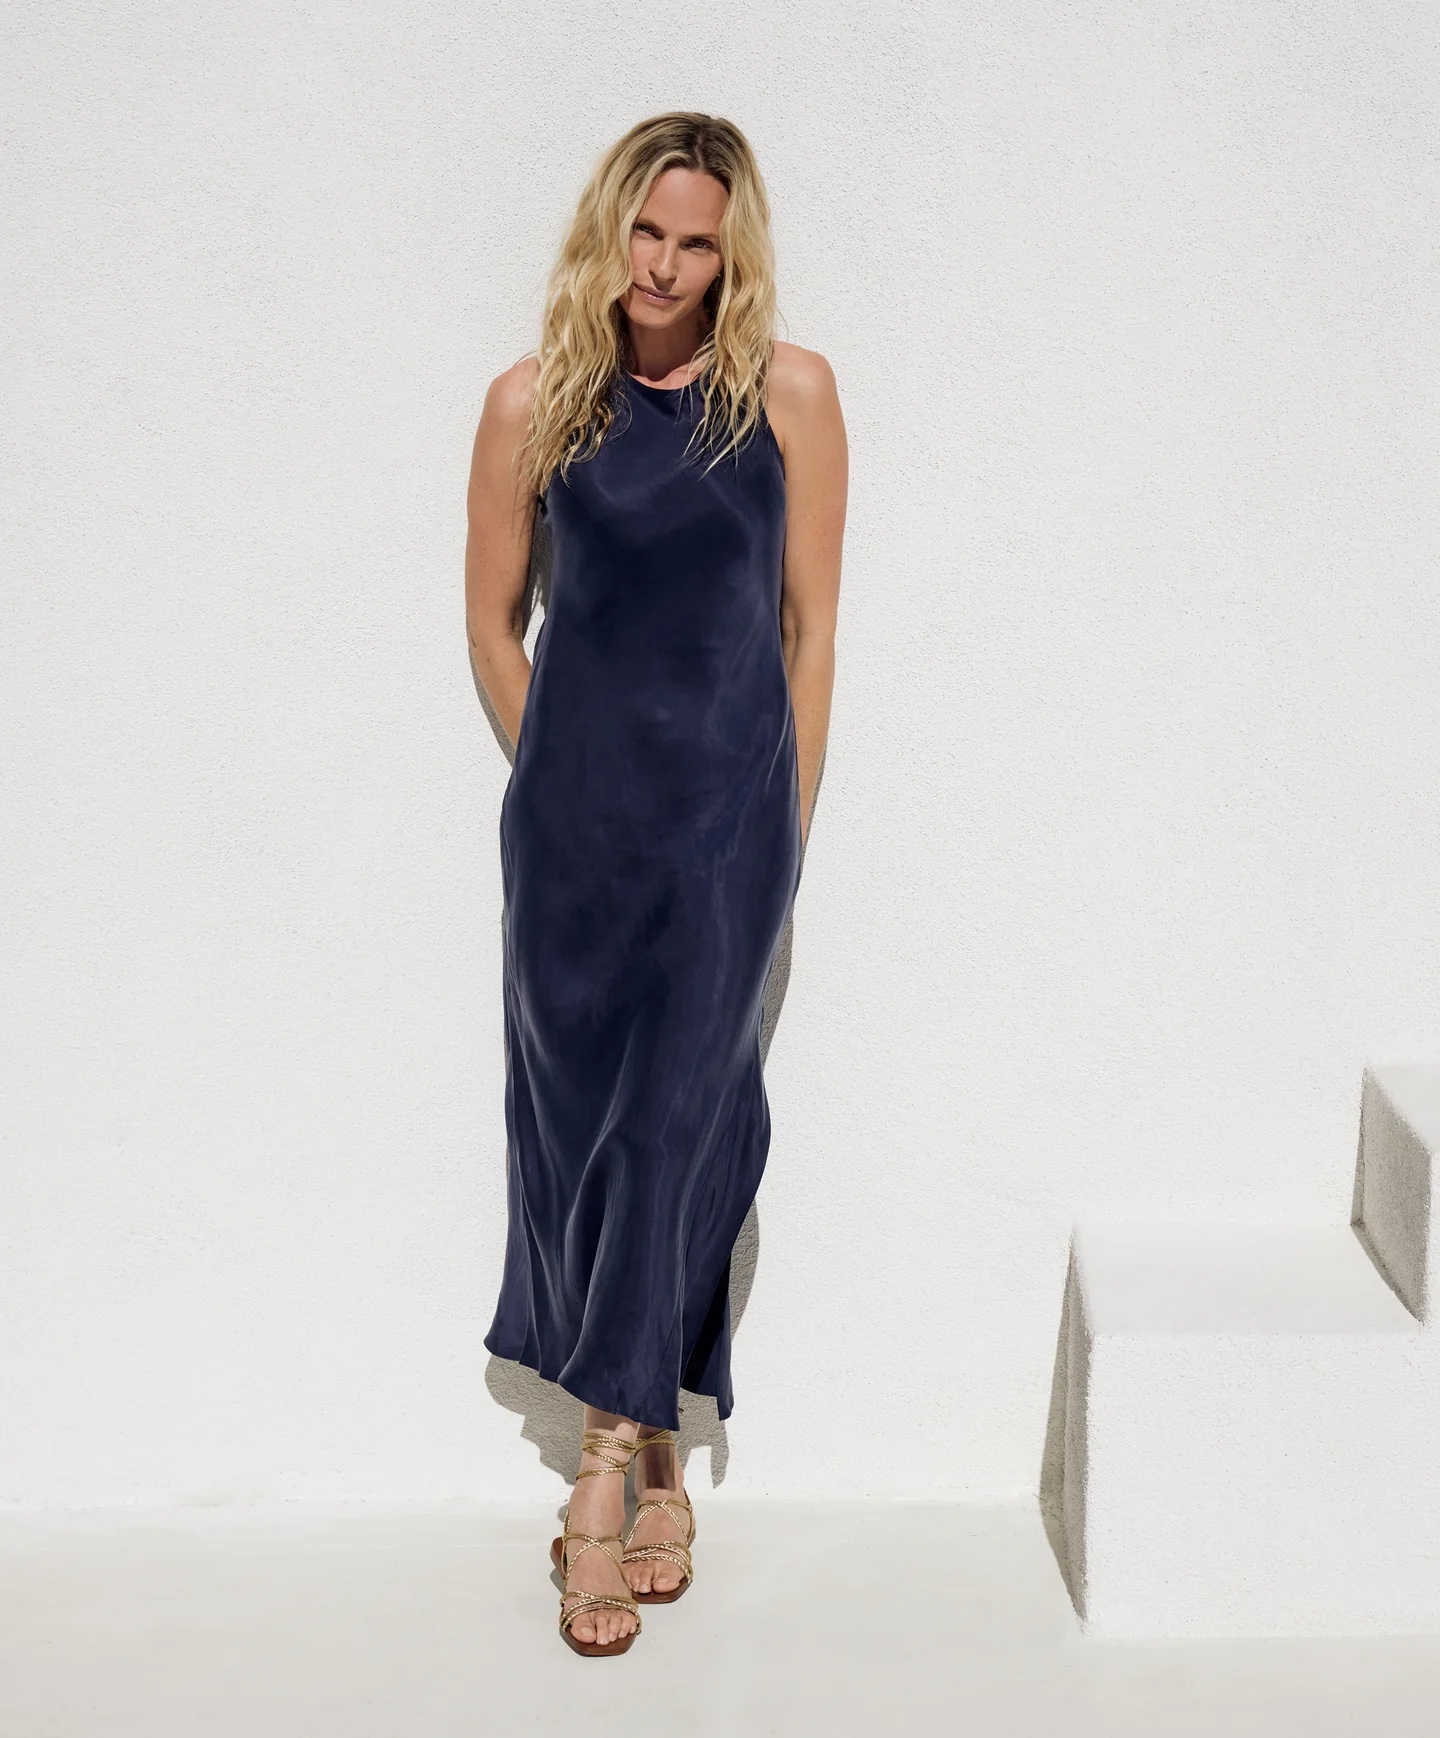 A model in a navy slip dress leans against a white wall.